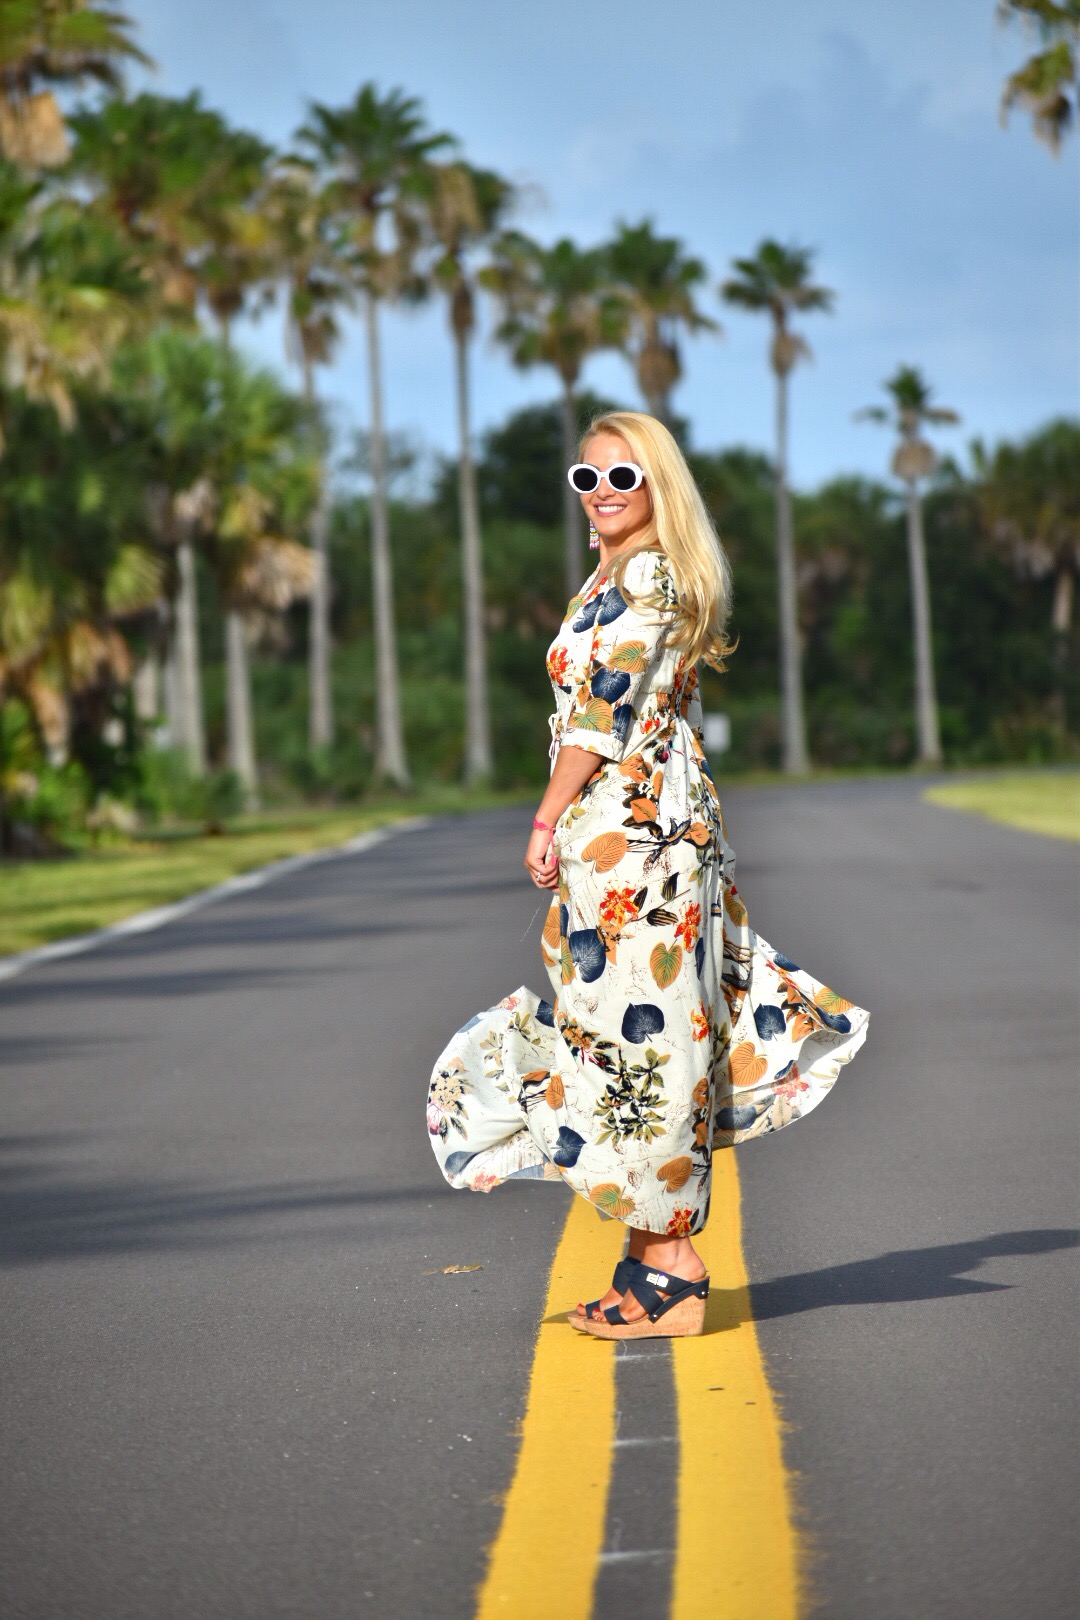 Bohemian Style, Floral Dress, White Oval Sunglasses and Wedges in Fort DeSoto Florida